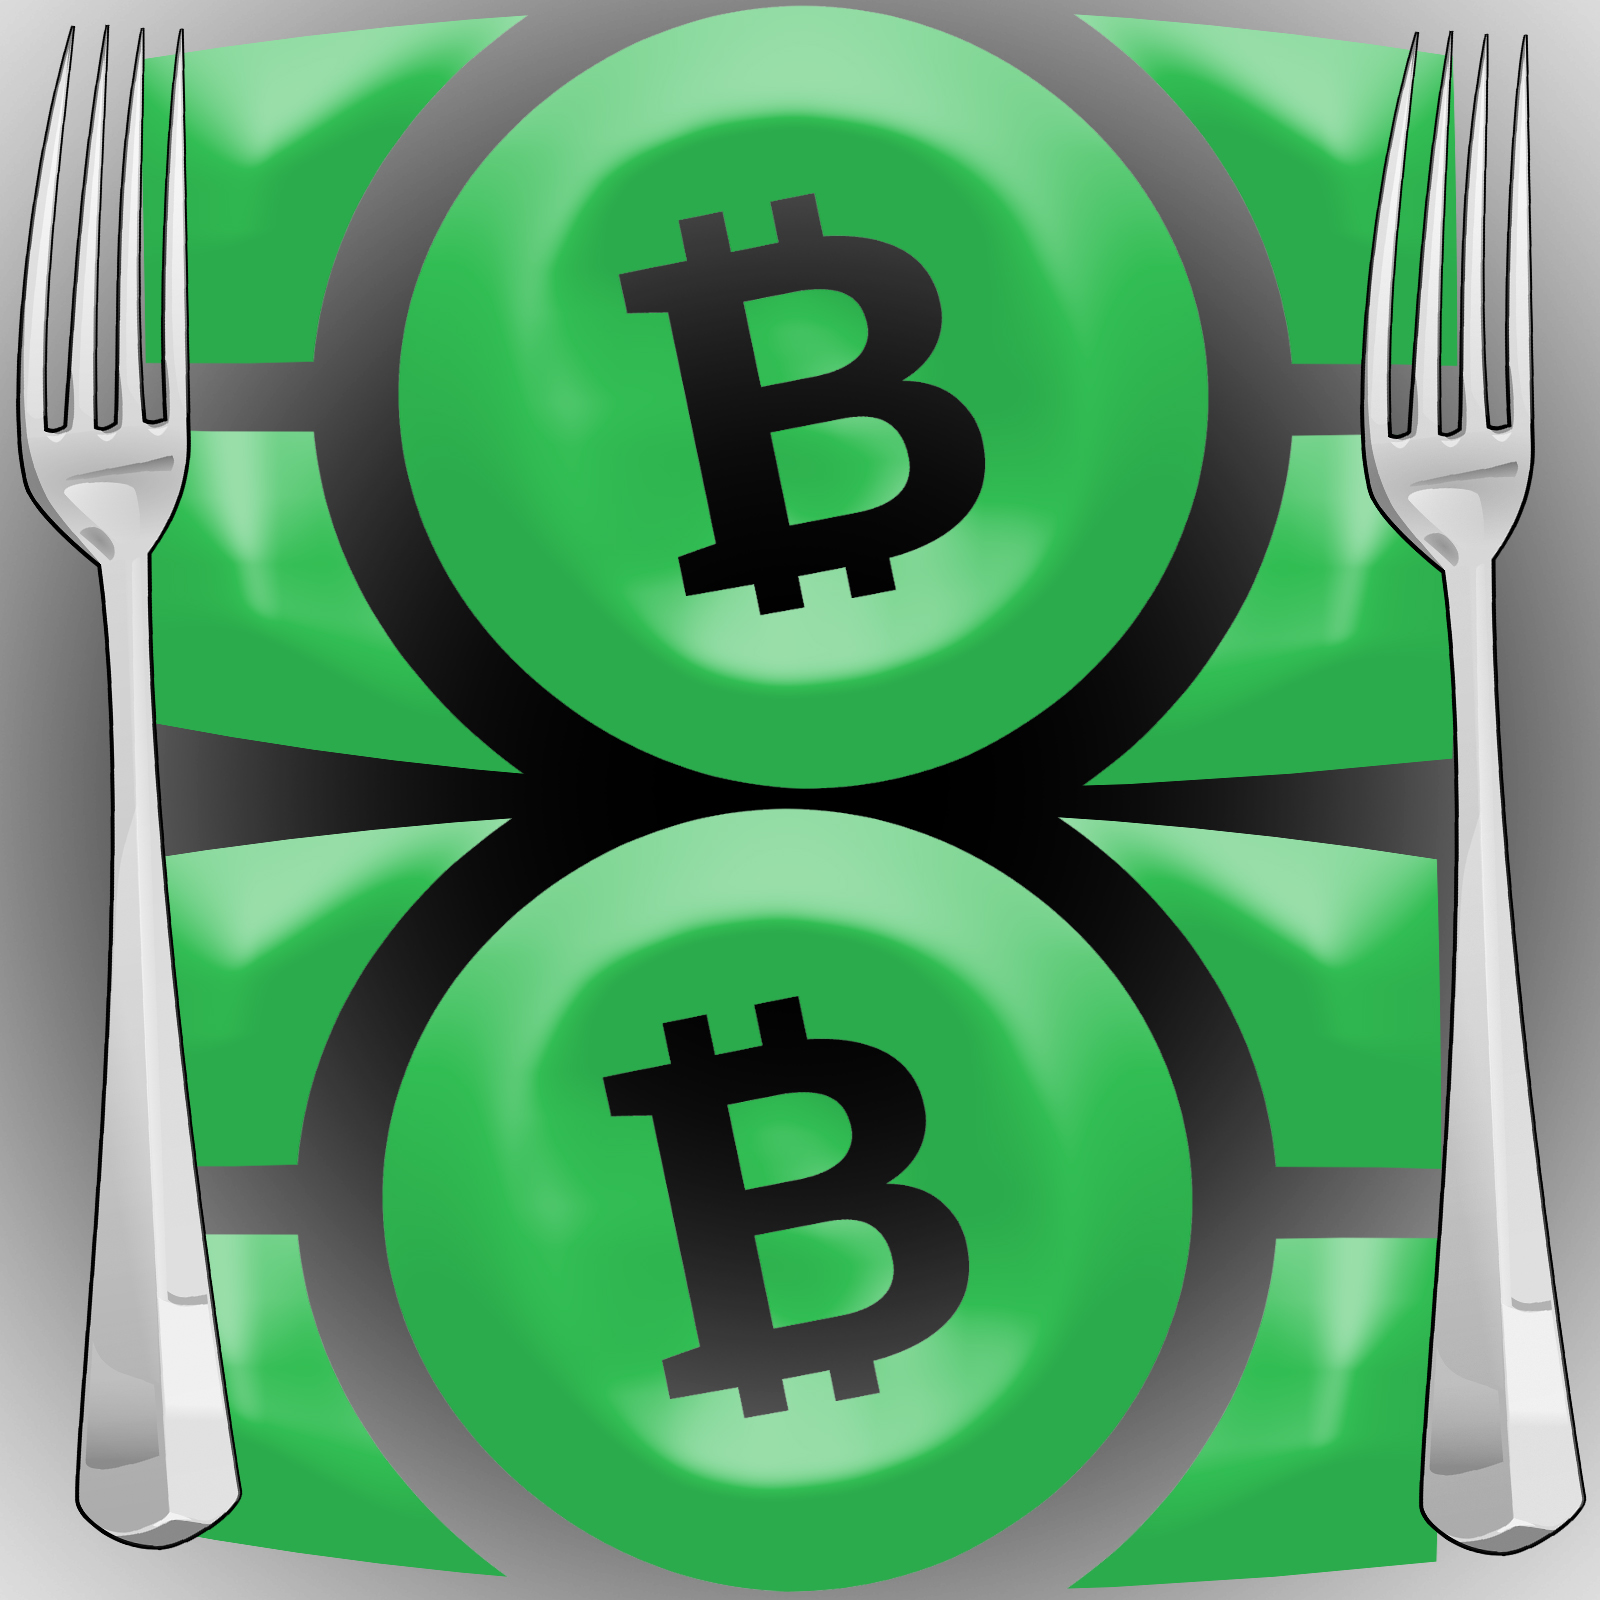 what happened at bitcoin cash fork